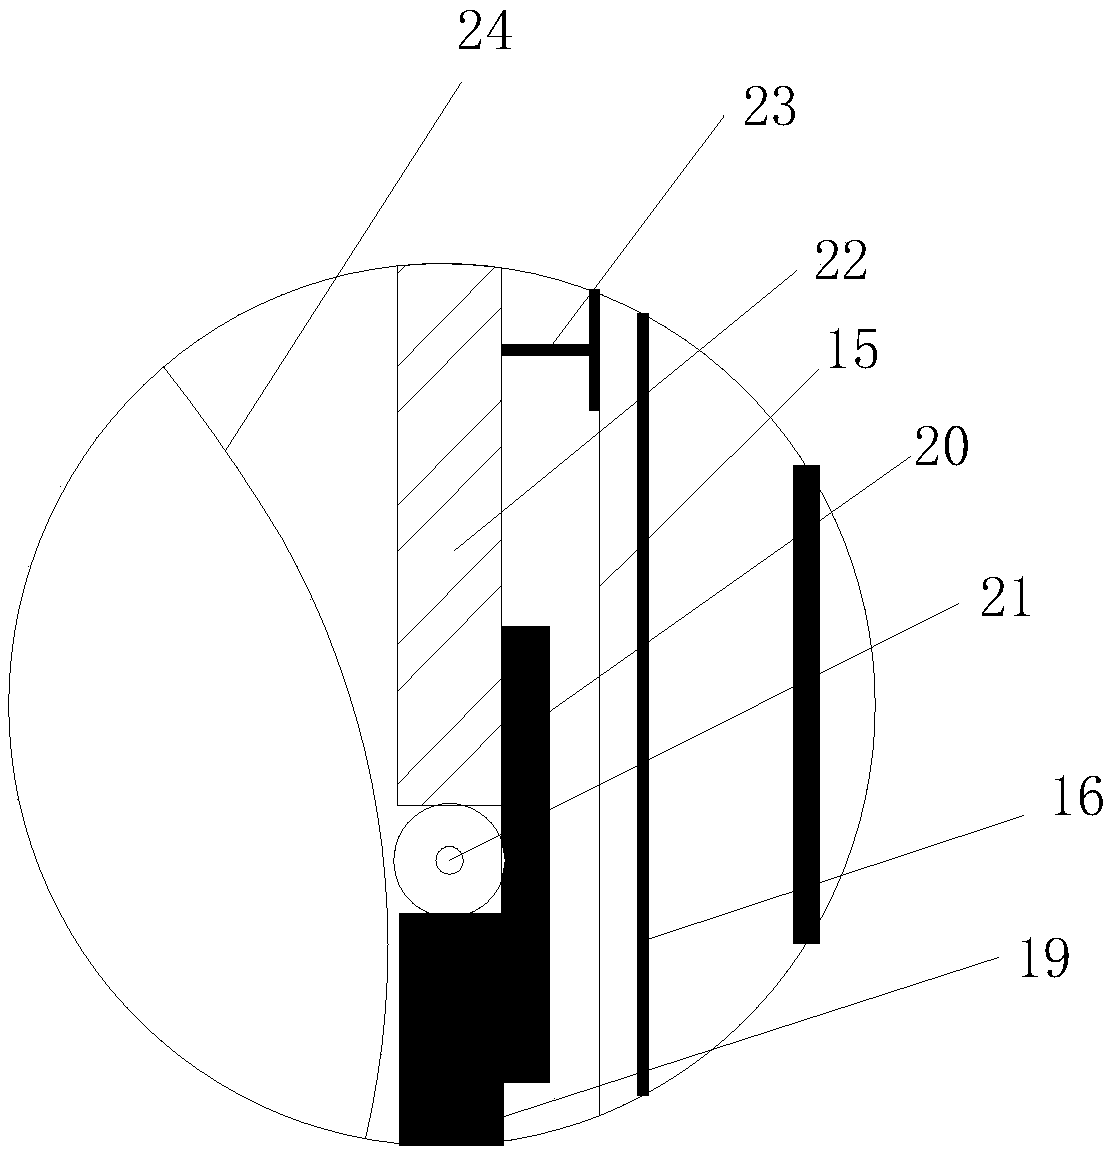 Construction method for isolating reserved foundation slab post-cast strip